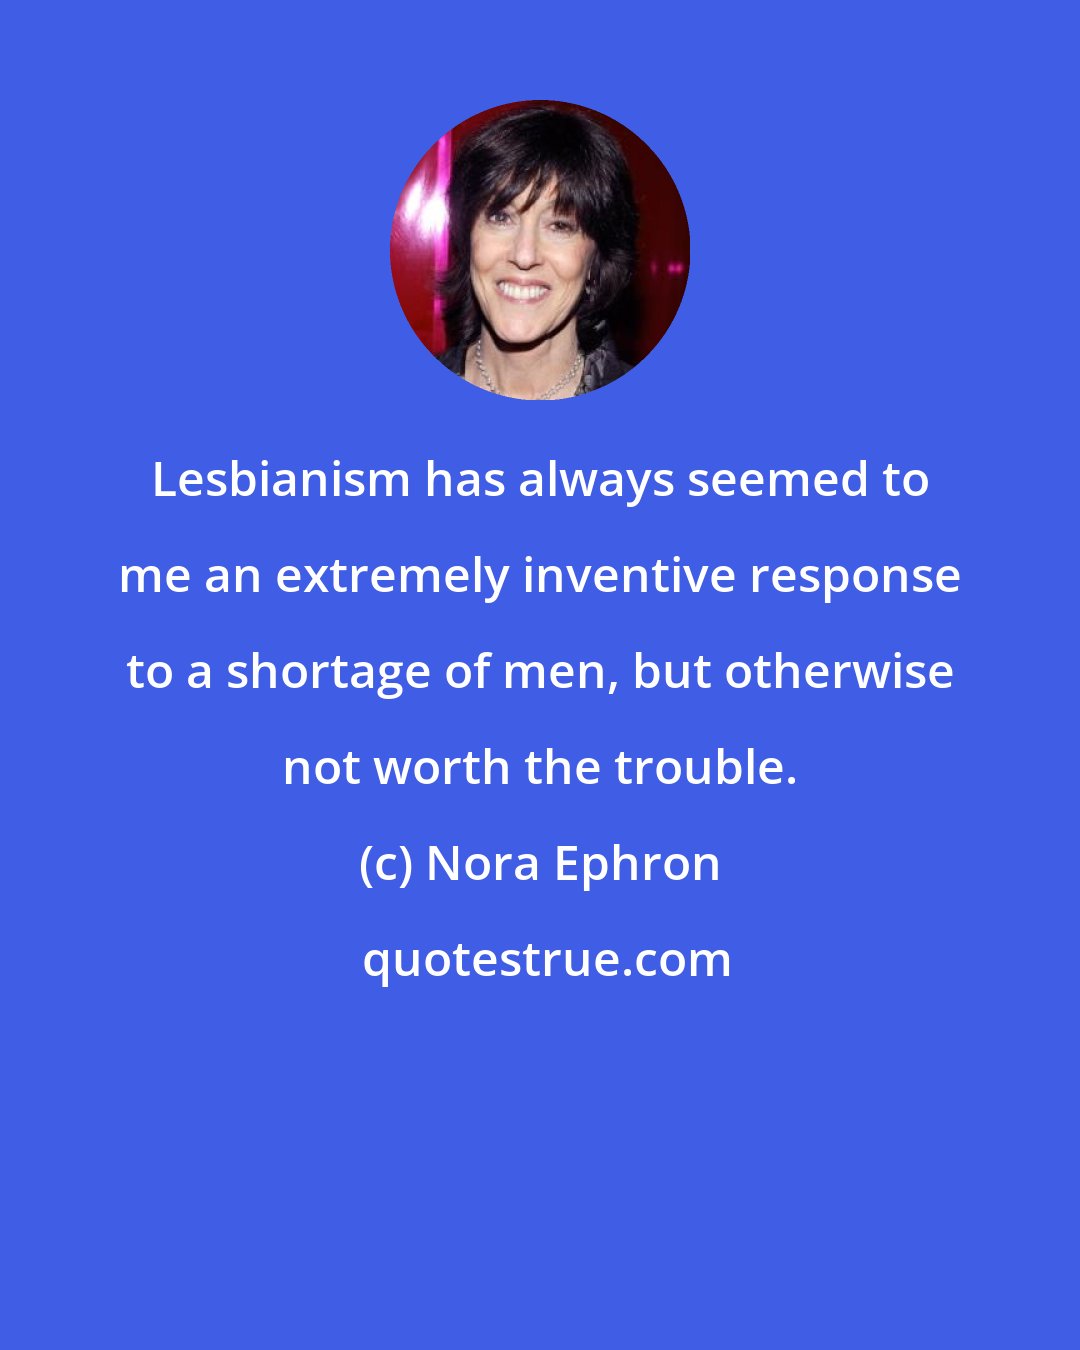 Nora Ephron: Lesbianism has always seemed to me an extremely inventive response to a shortage of men, but otherwise not worth the trouble.